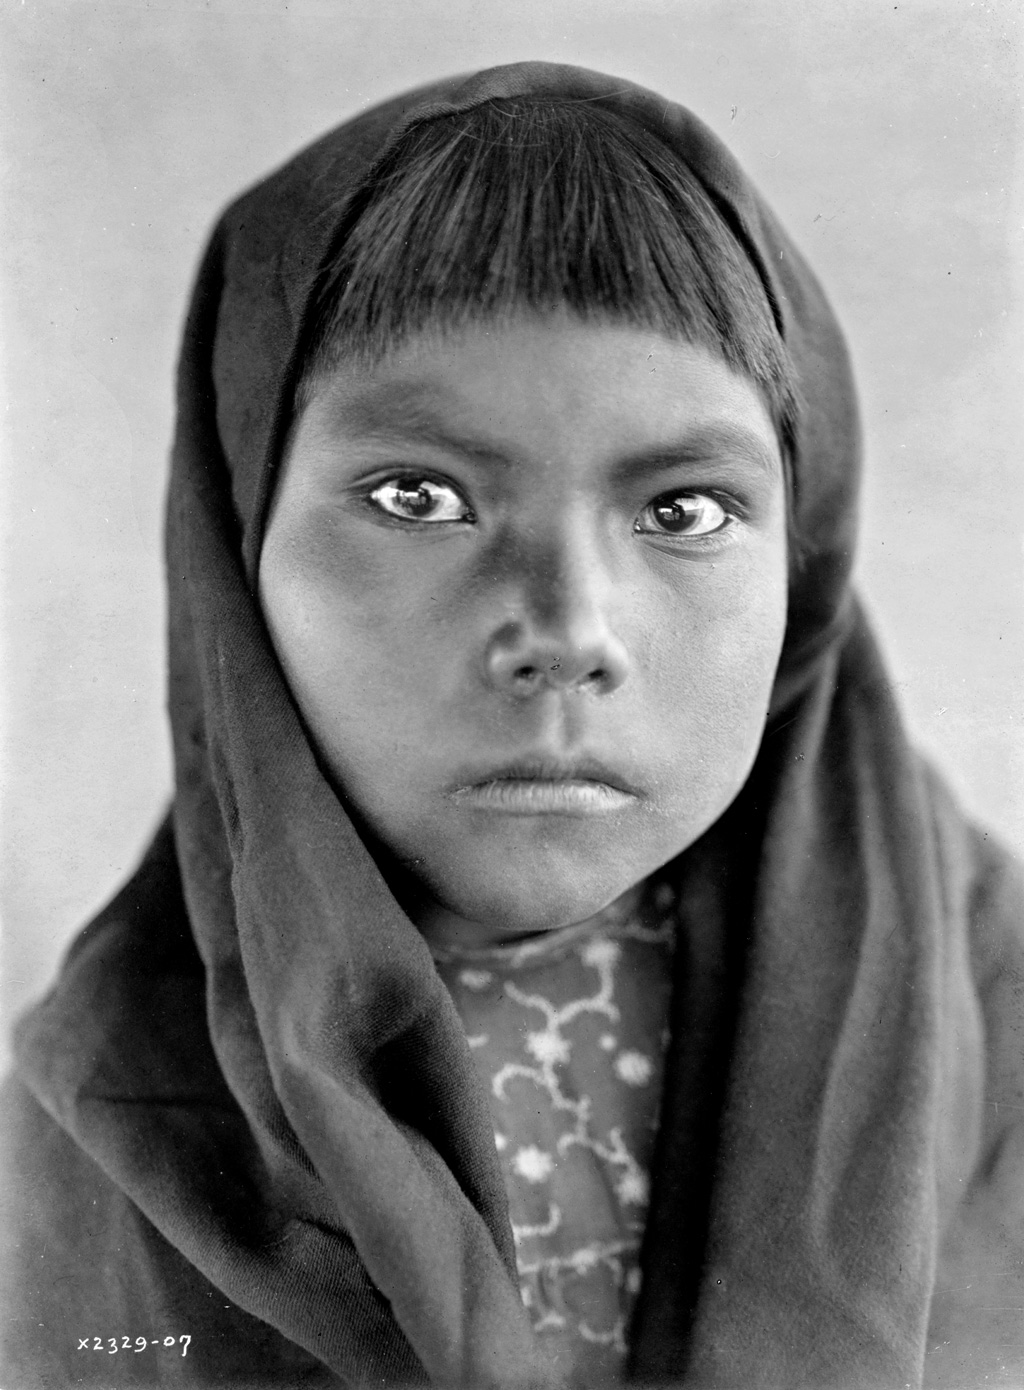 A Qahatika Native-American child. Photograph by Edward S. Curtis, c. 1907. View full size.